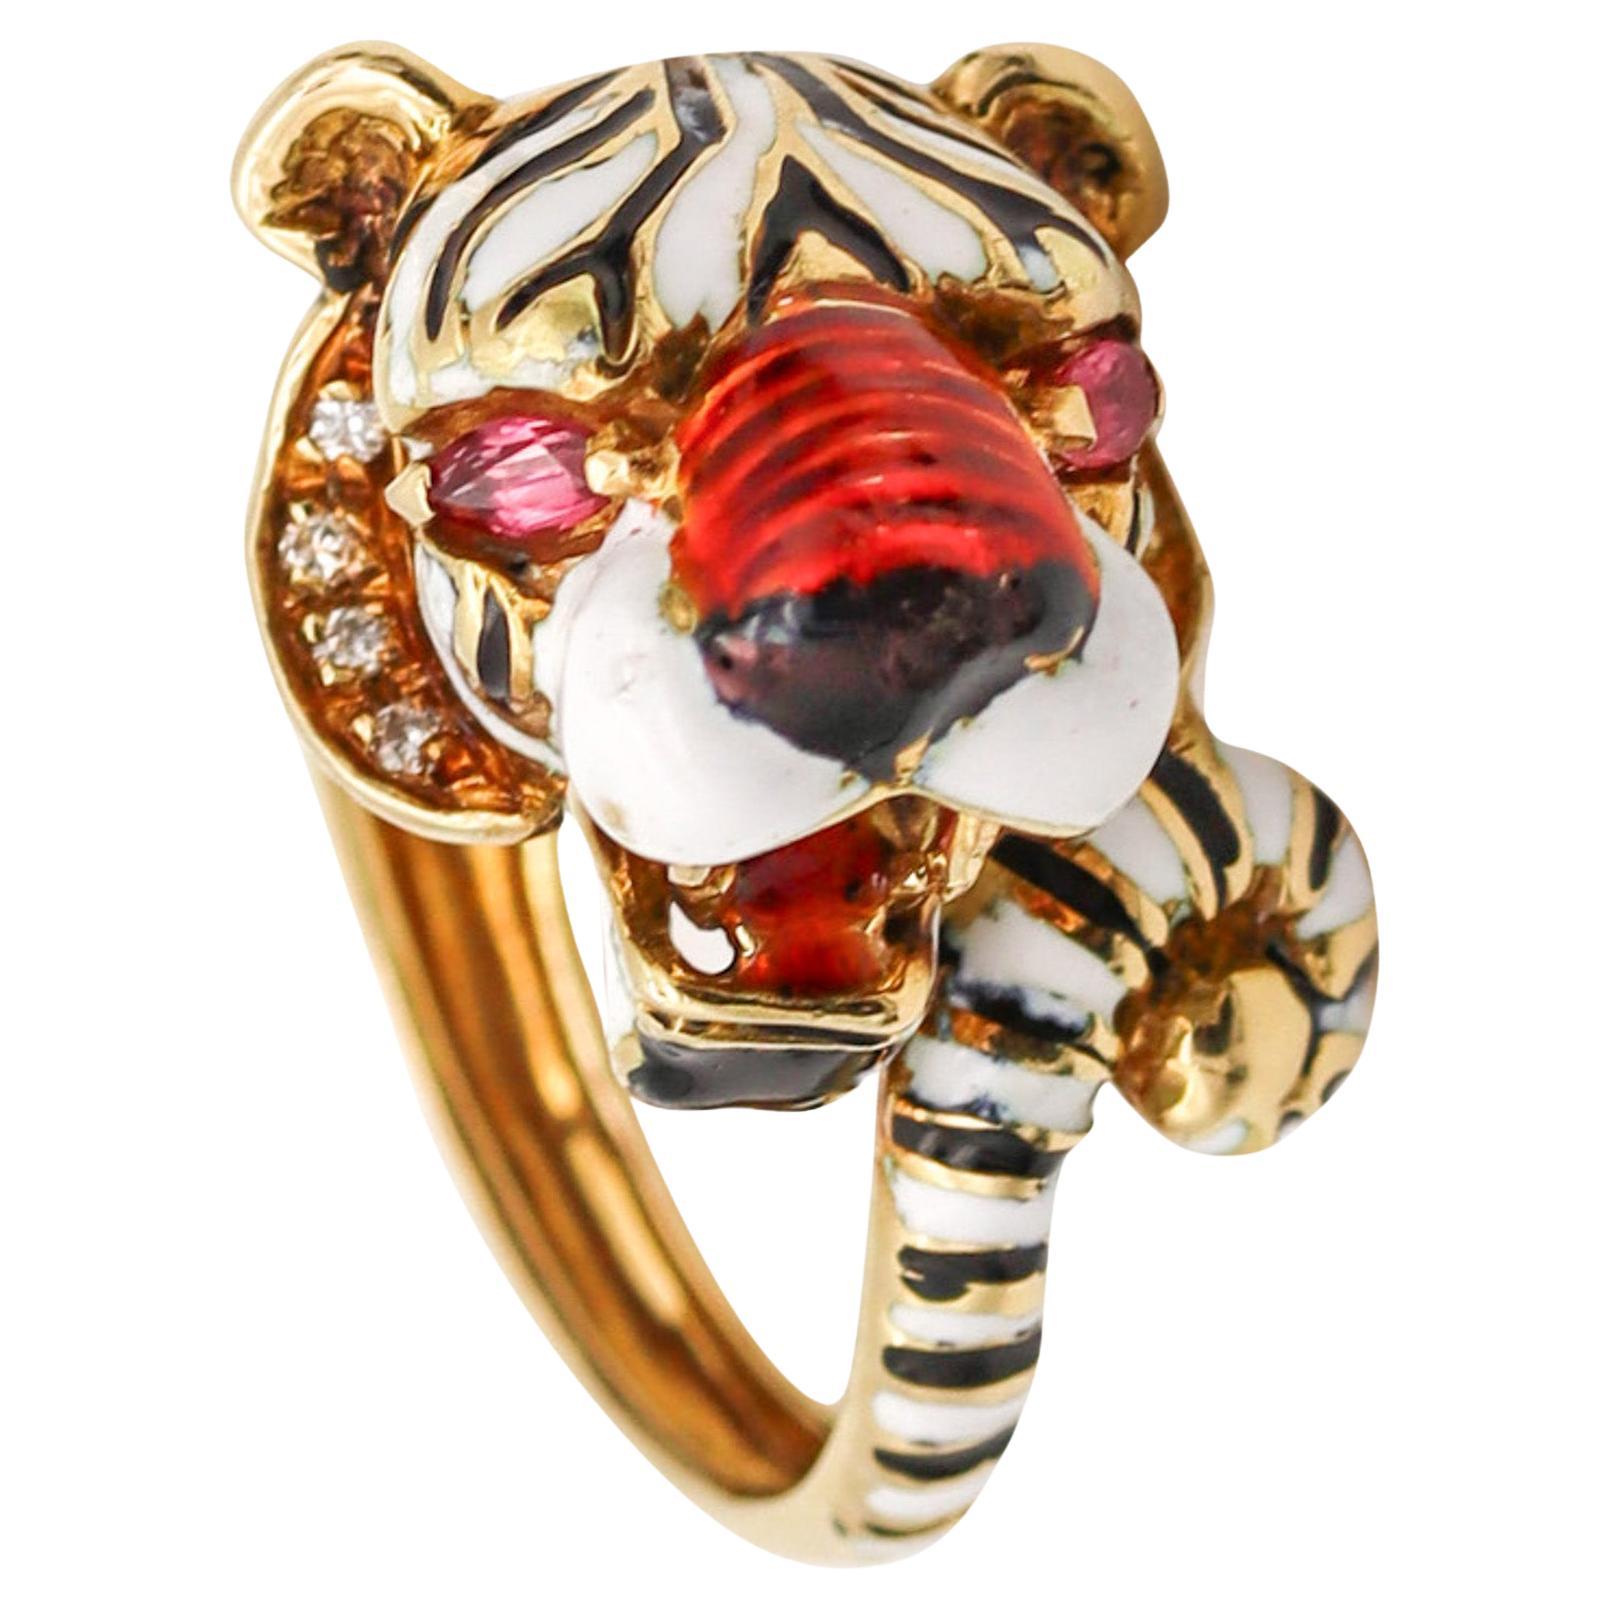 Frascarolo Milano Enameled Tiger Cocktail Ring in 18Kt Gold Diamonds And Rubies For Sale